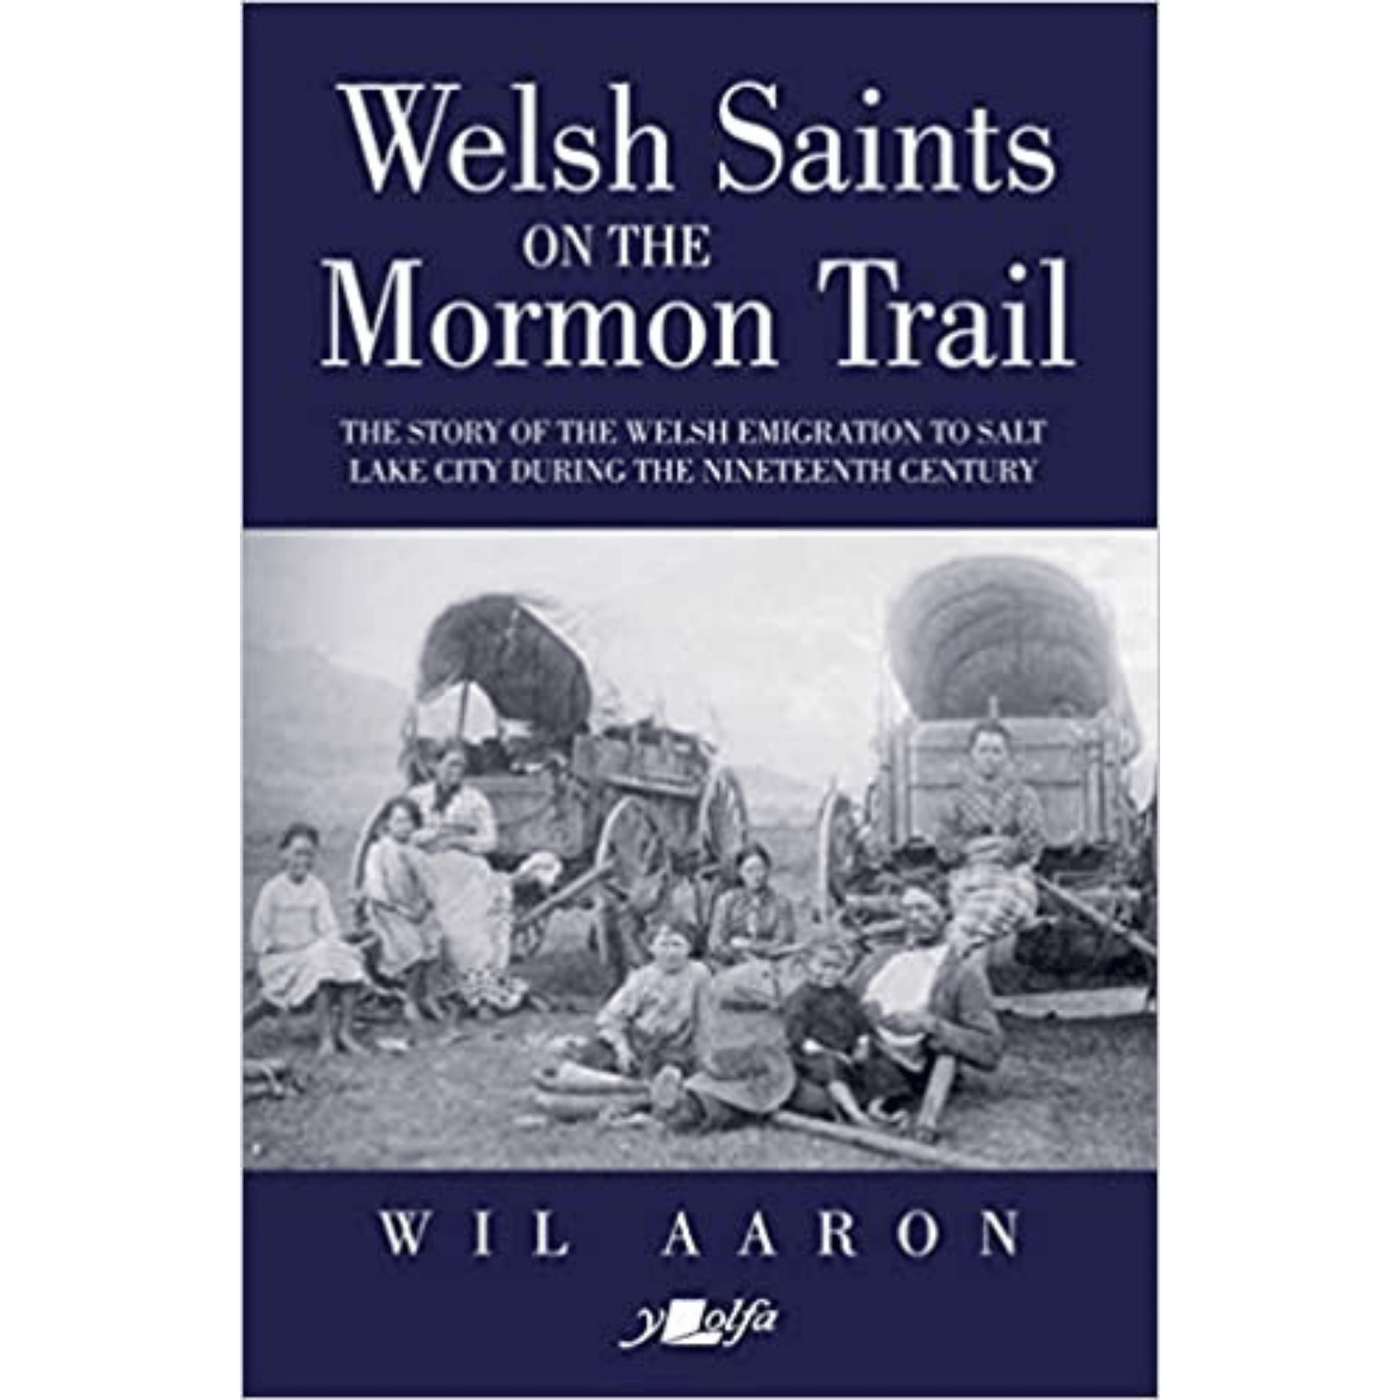 Wil Aaron: Welsh Saints on the Mormon Trail: The Story of the Nineteenth-Century Welsh Emigrants to Salt Lake City